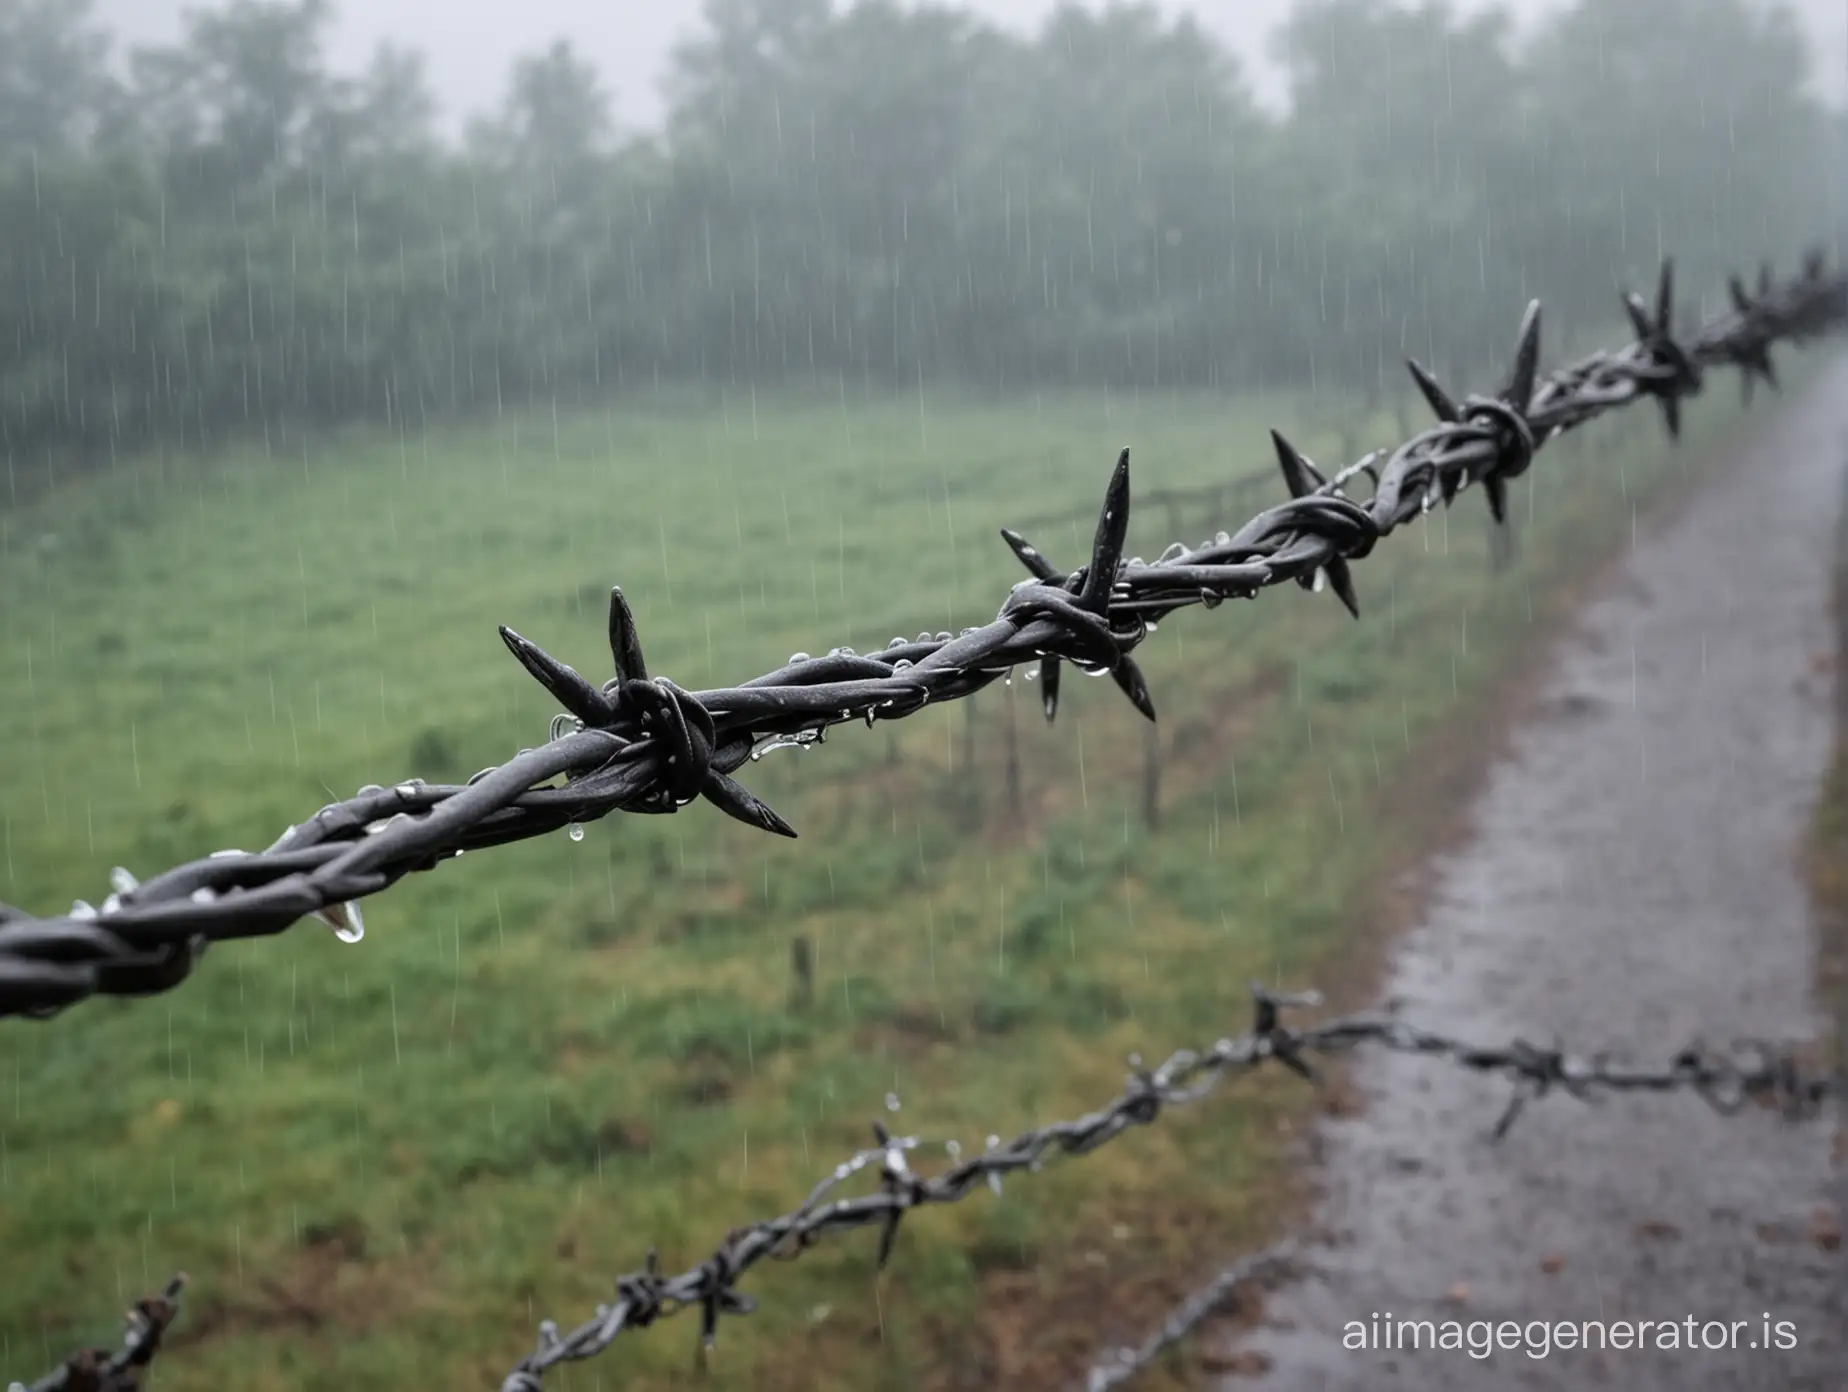 Barbed wire, raining